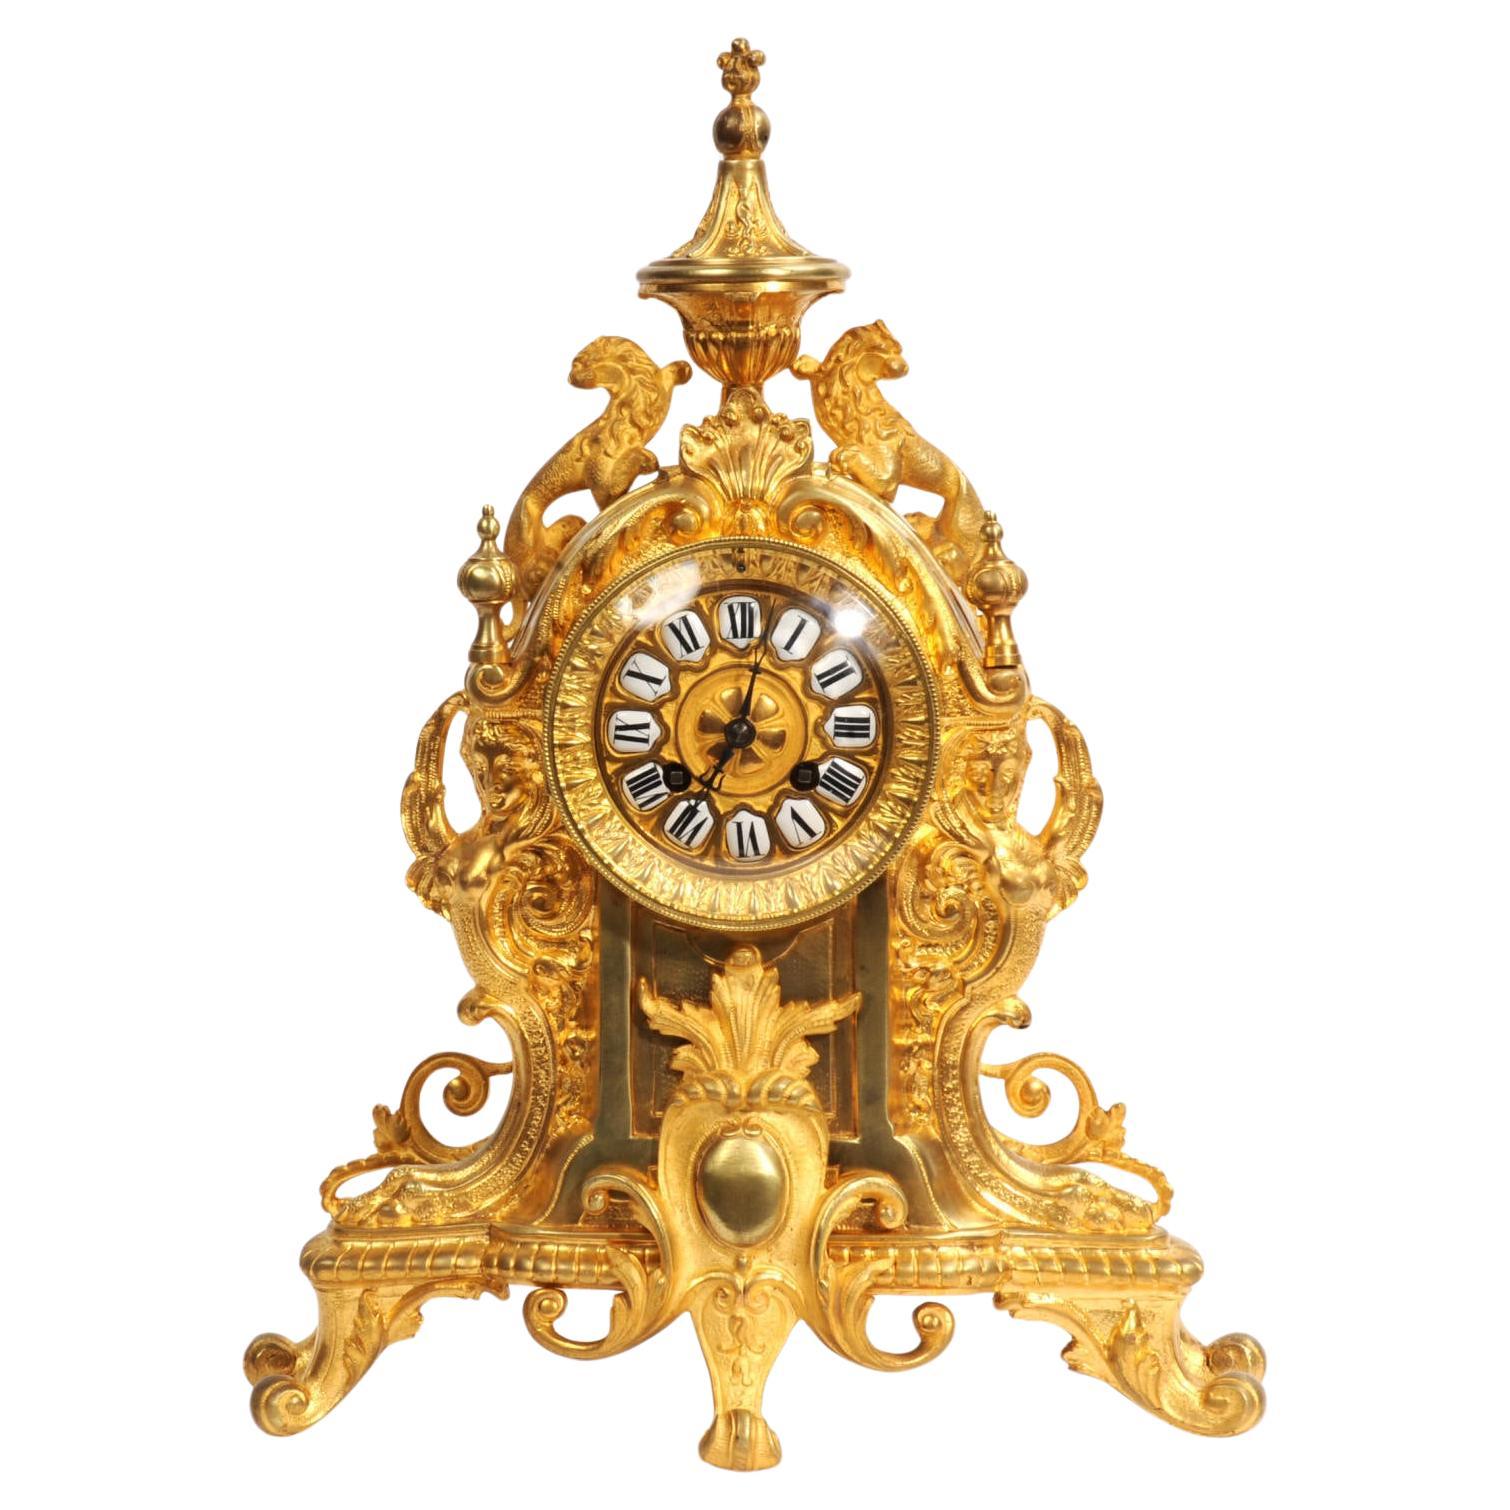 Antique French Ormolu Clock - Lions Rampant - overhauled and tested For Sale